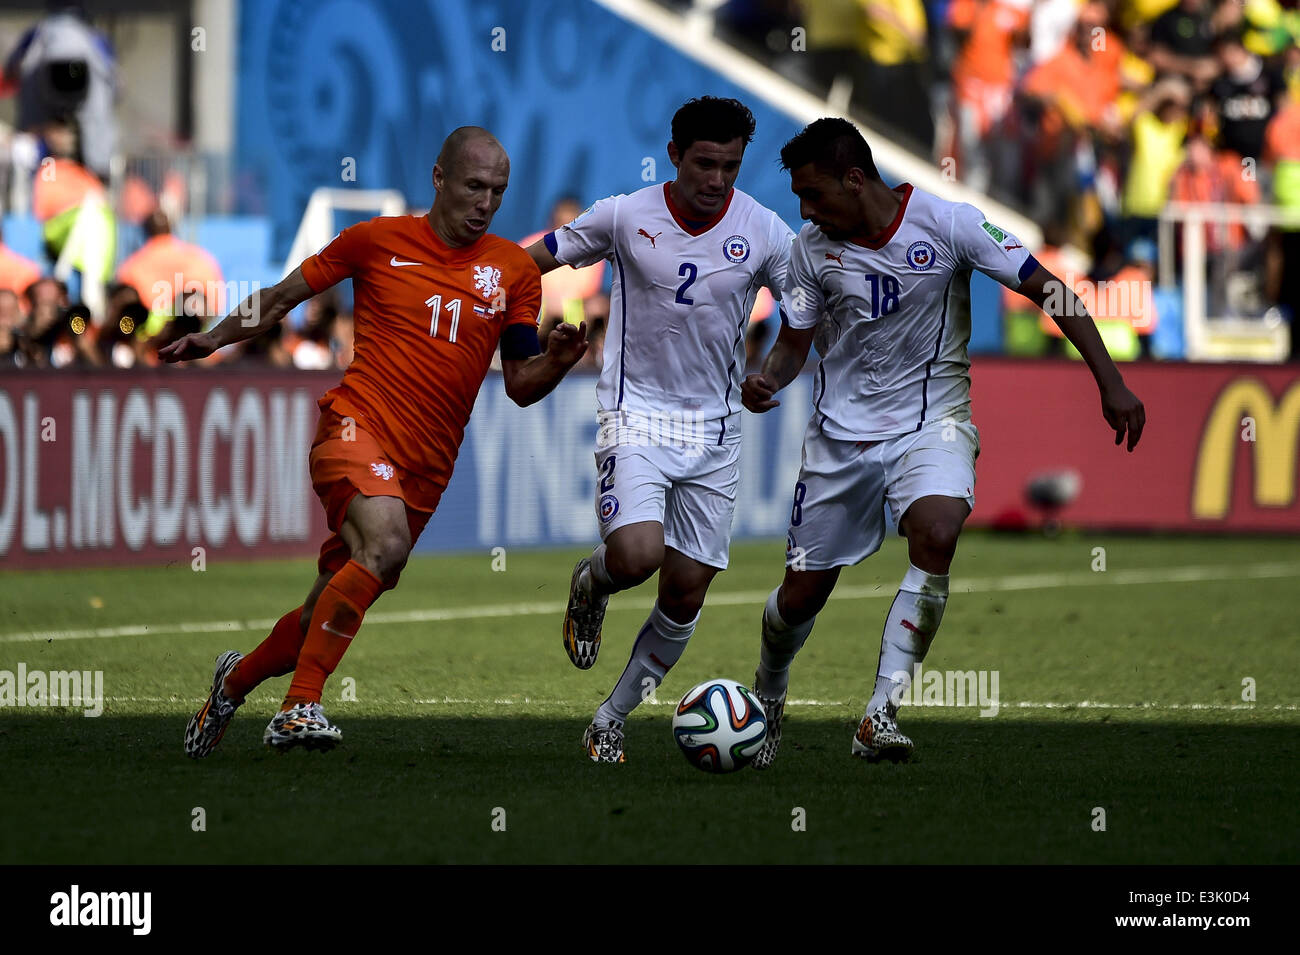 Sao Paolo, Brazil. 23rd June, 2014. Arjen Robben (11), Eugenio Mena (2) and Gonzalo Jara (18) at the match #36 of the 2014 World Cup, between Netherlands and Chile, this monday, June 23rd, in Sao Paulo, Brasil Credit:  Gustavo Basso/NurPhoto/ZUMAPRESS.com/Alamy Live News Stock Photo